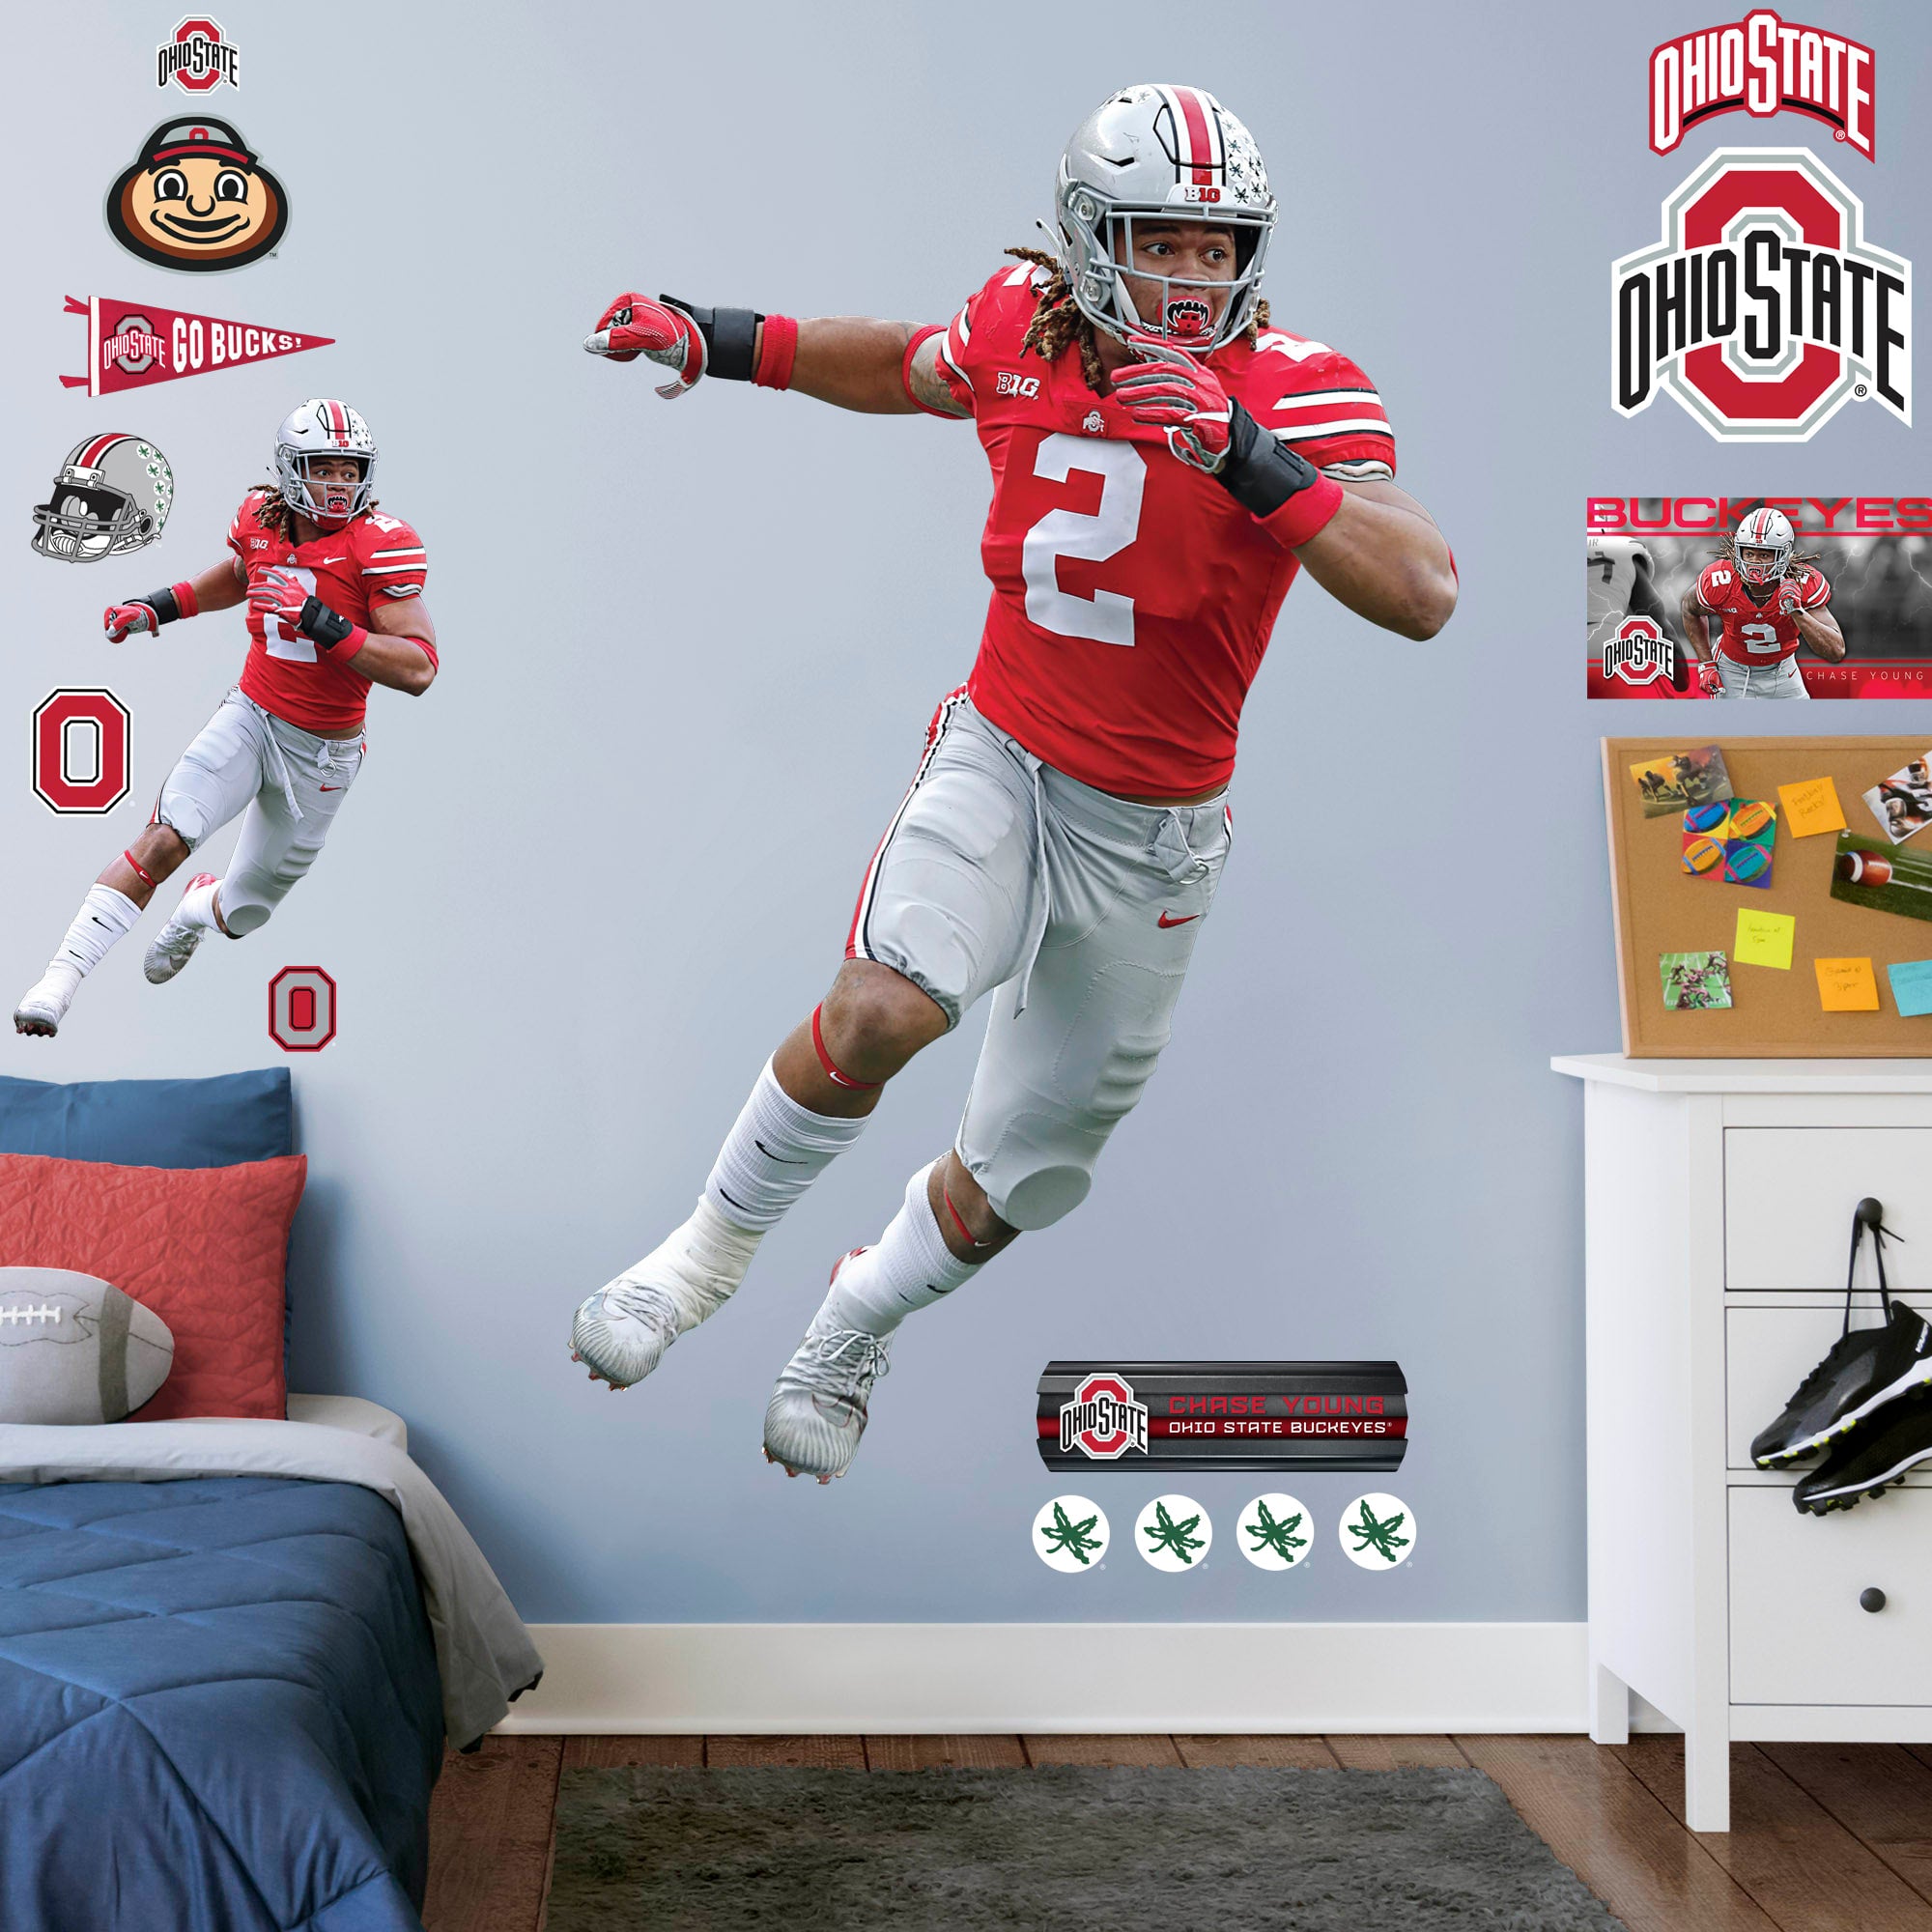 Chase Young for Ohio State Buckeyes: Ohio State - Officially Licensed Removable Wall Decal Life-Size Athlete + 20 Decals (50"W x